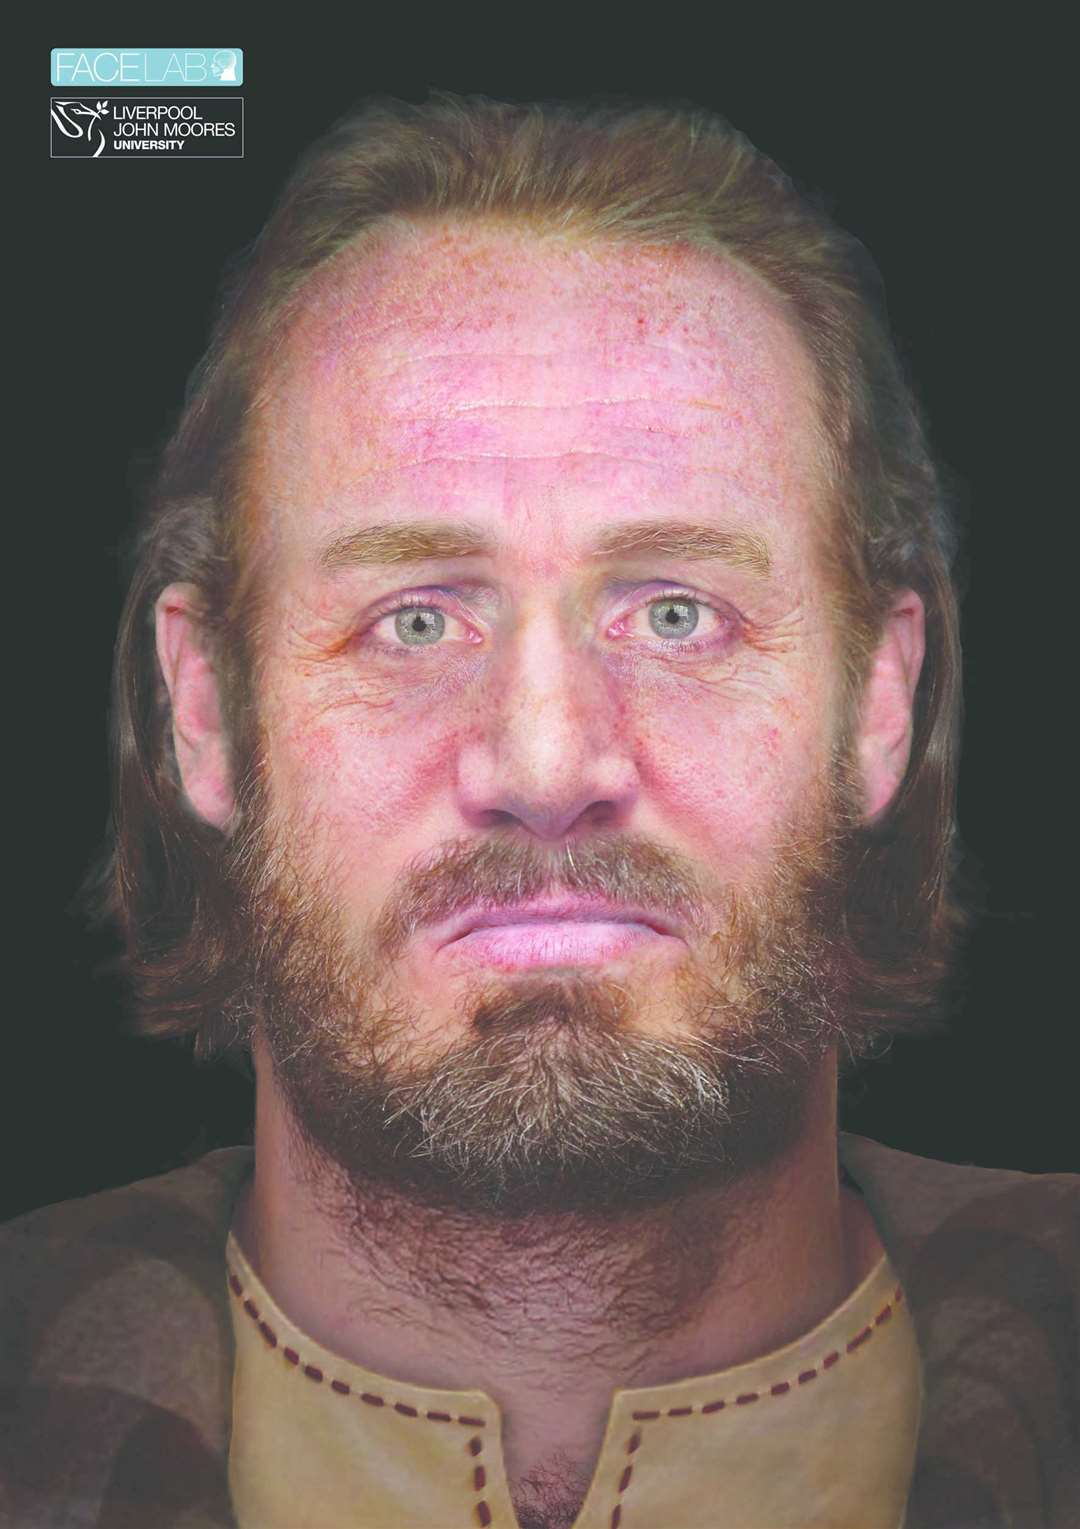 An image of what the man may have looked like.